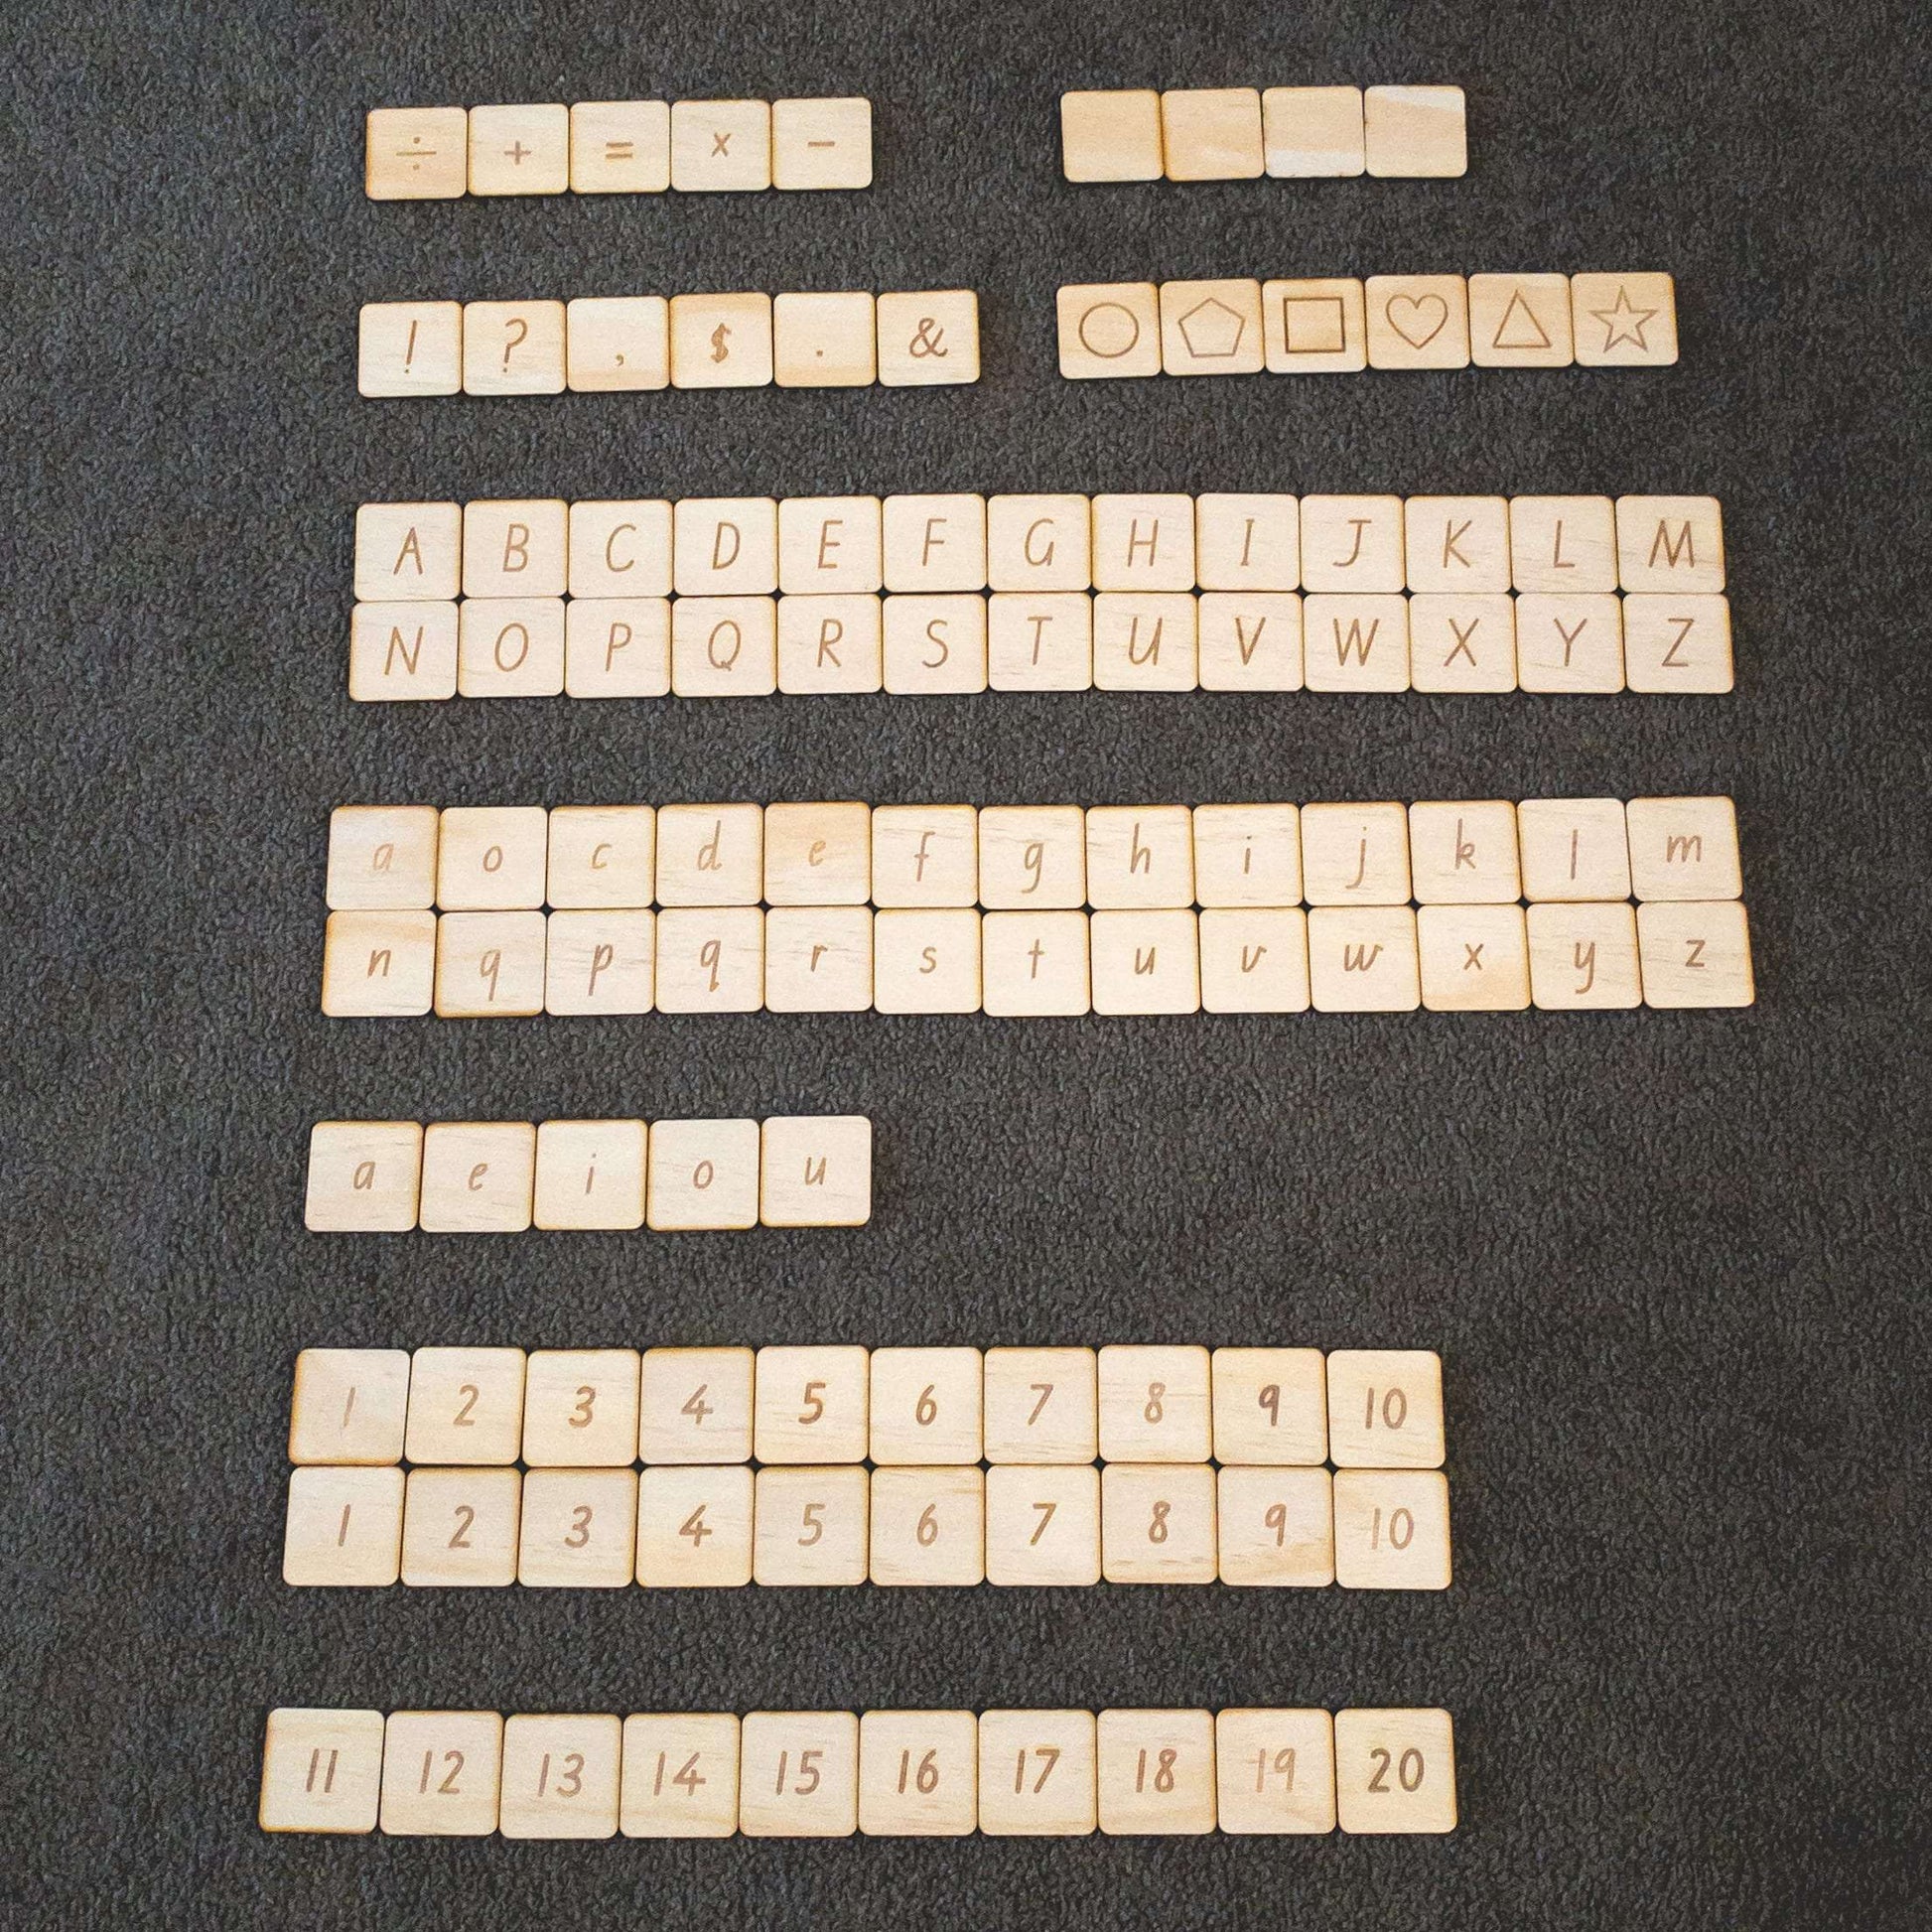 Alphabet and Number Tiles - Full set laid out.